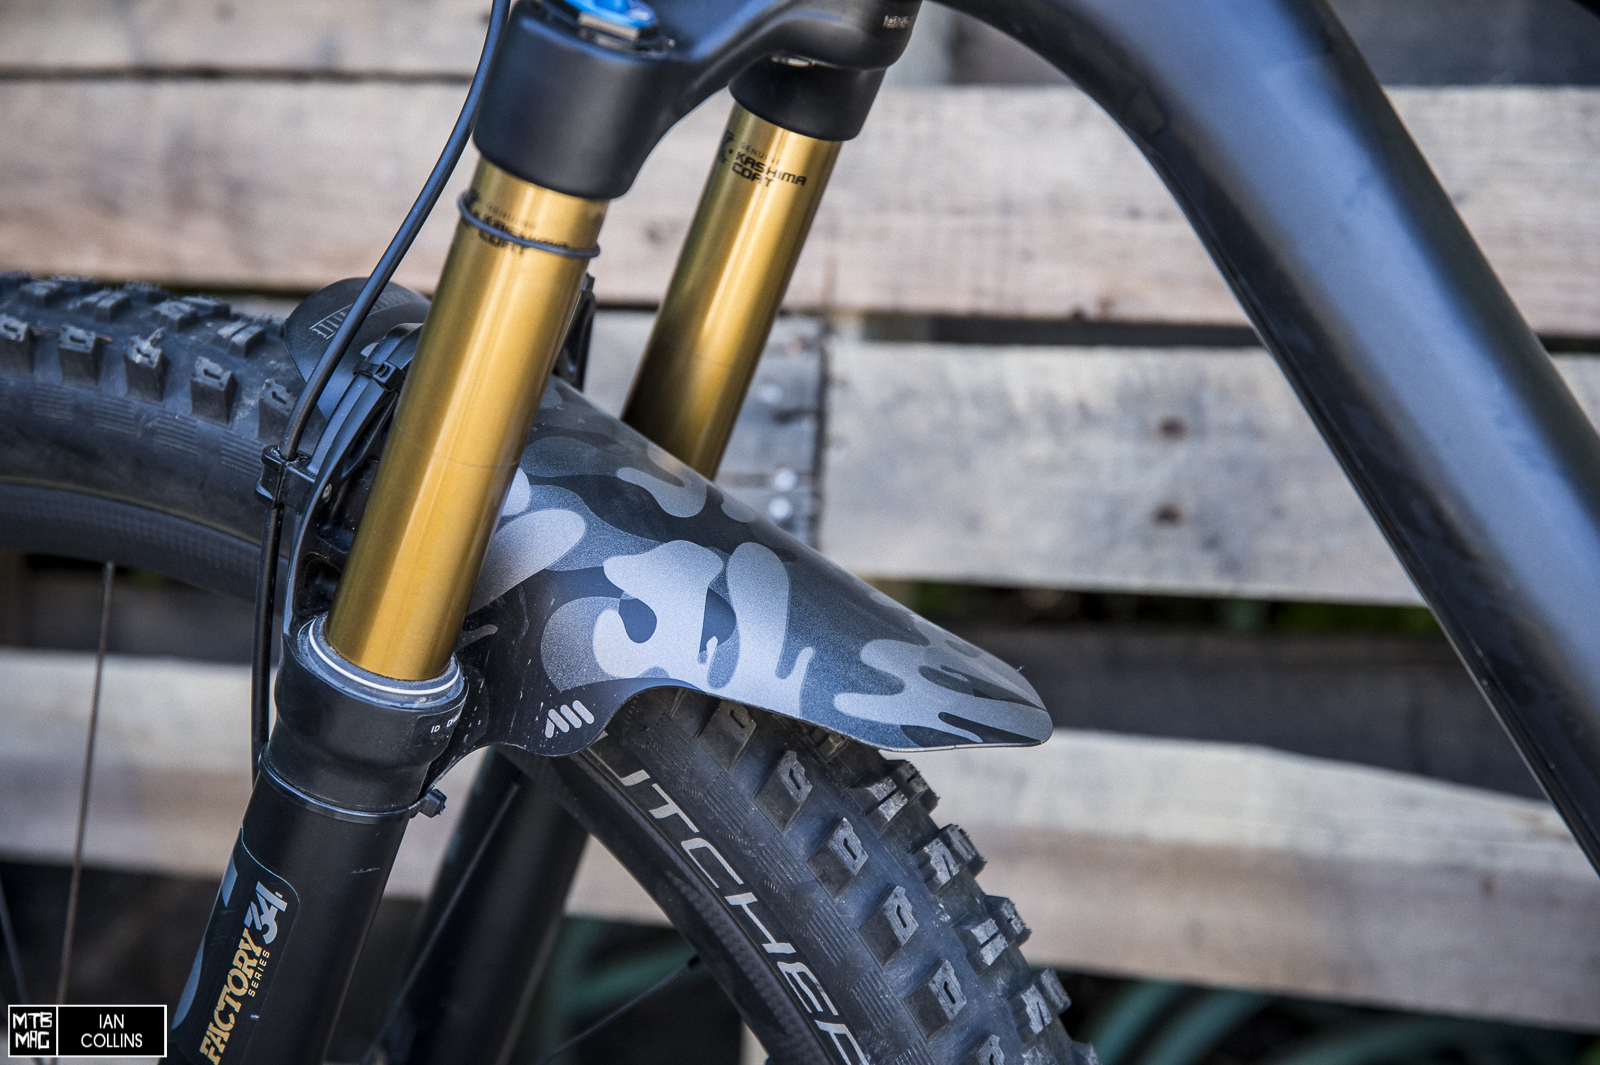 Tested] All Mountain Style Mud Guard